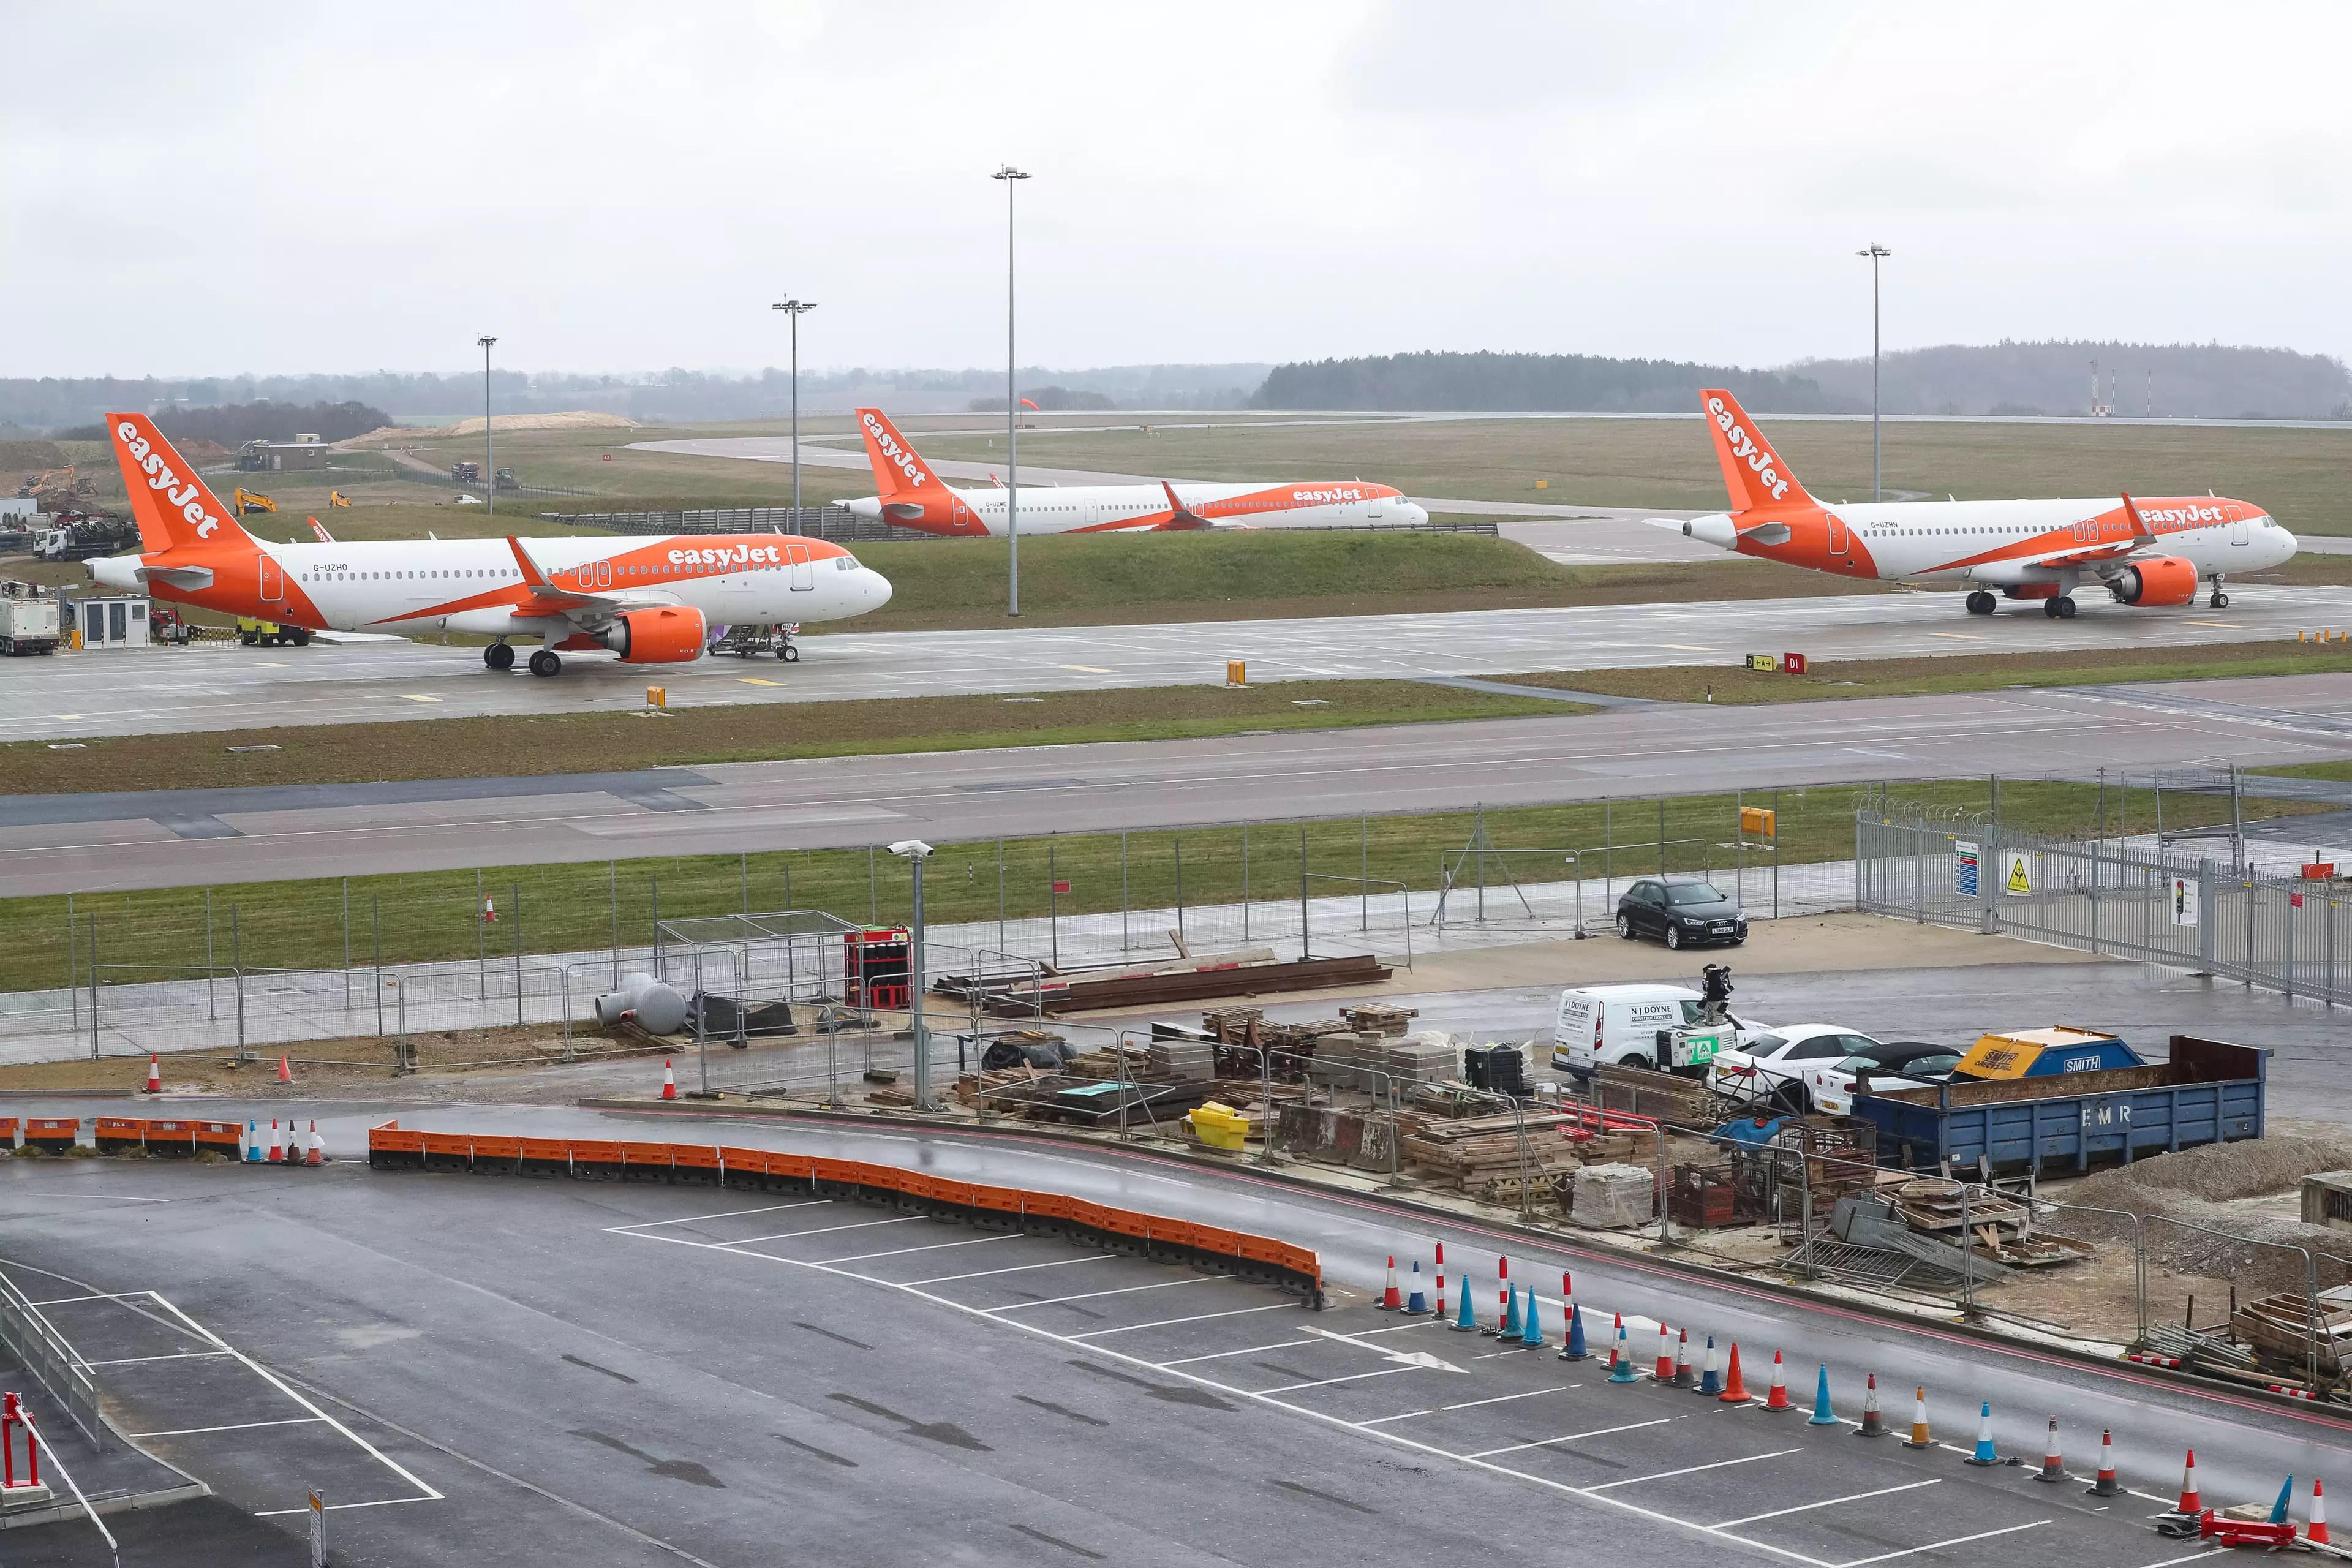 EasyJet planes sit on the tarmac at Luton Airport in Bedfordshire.